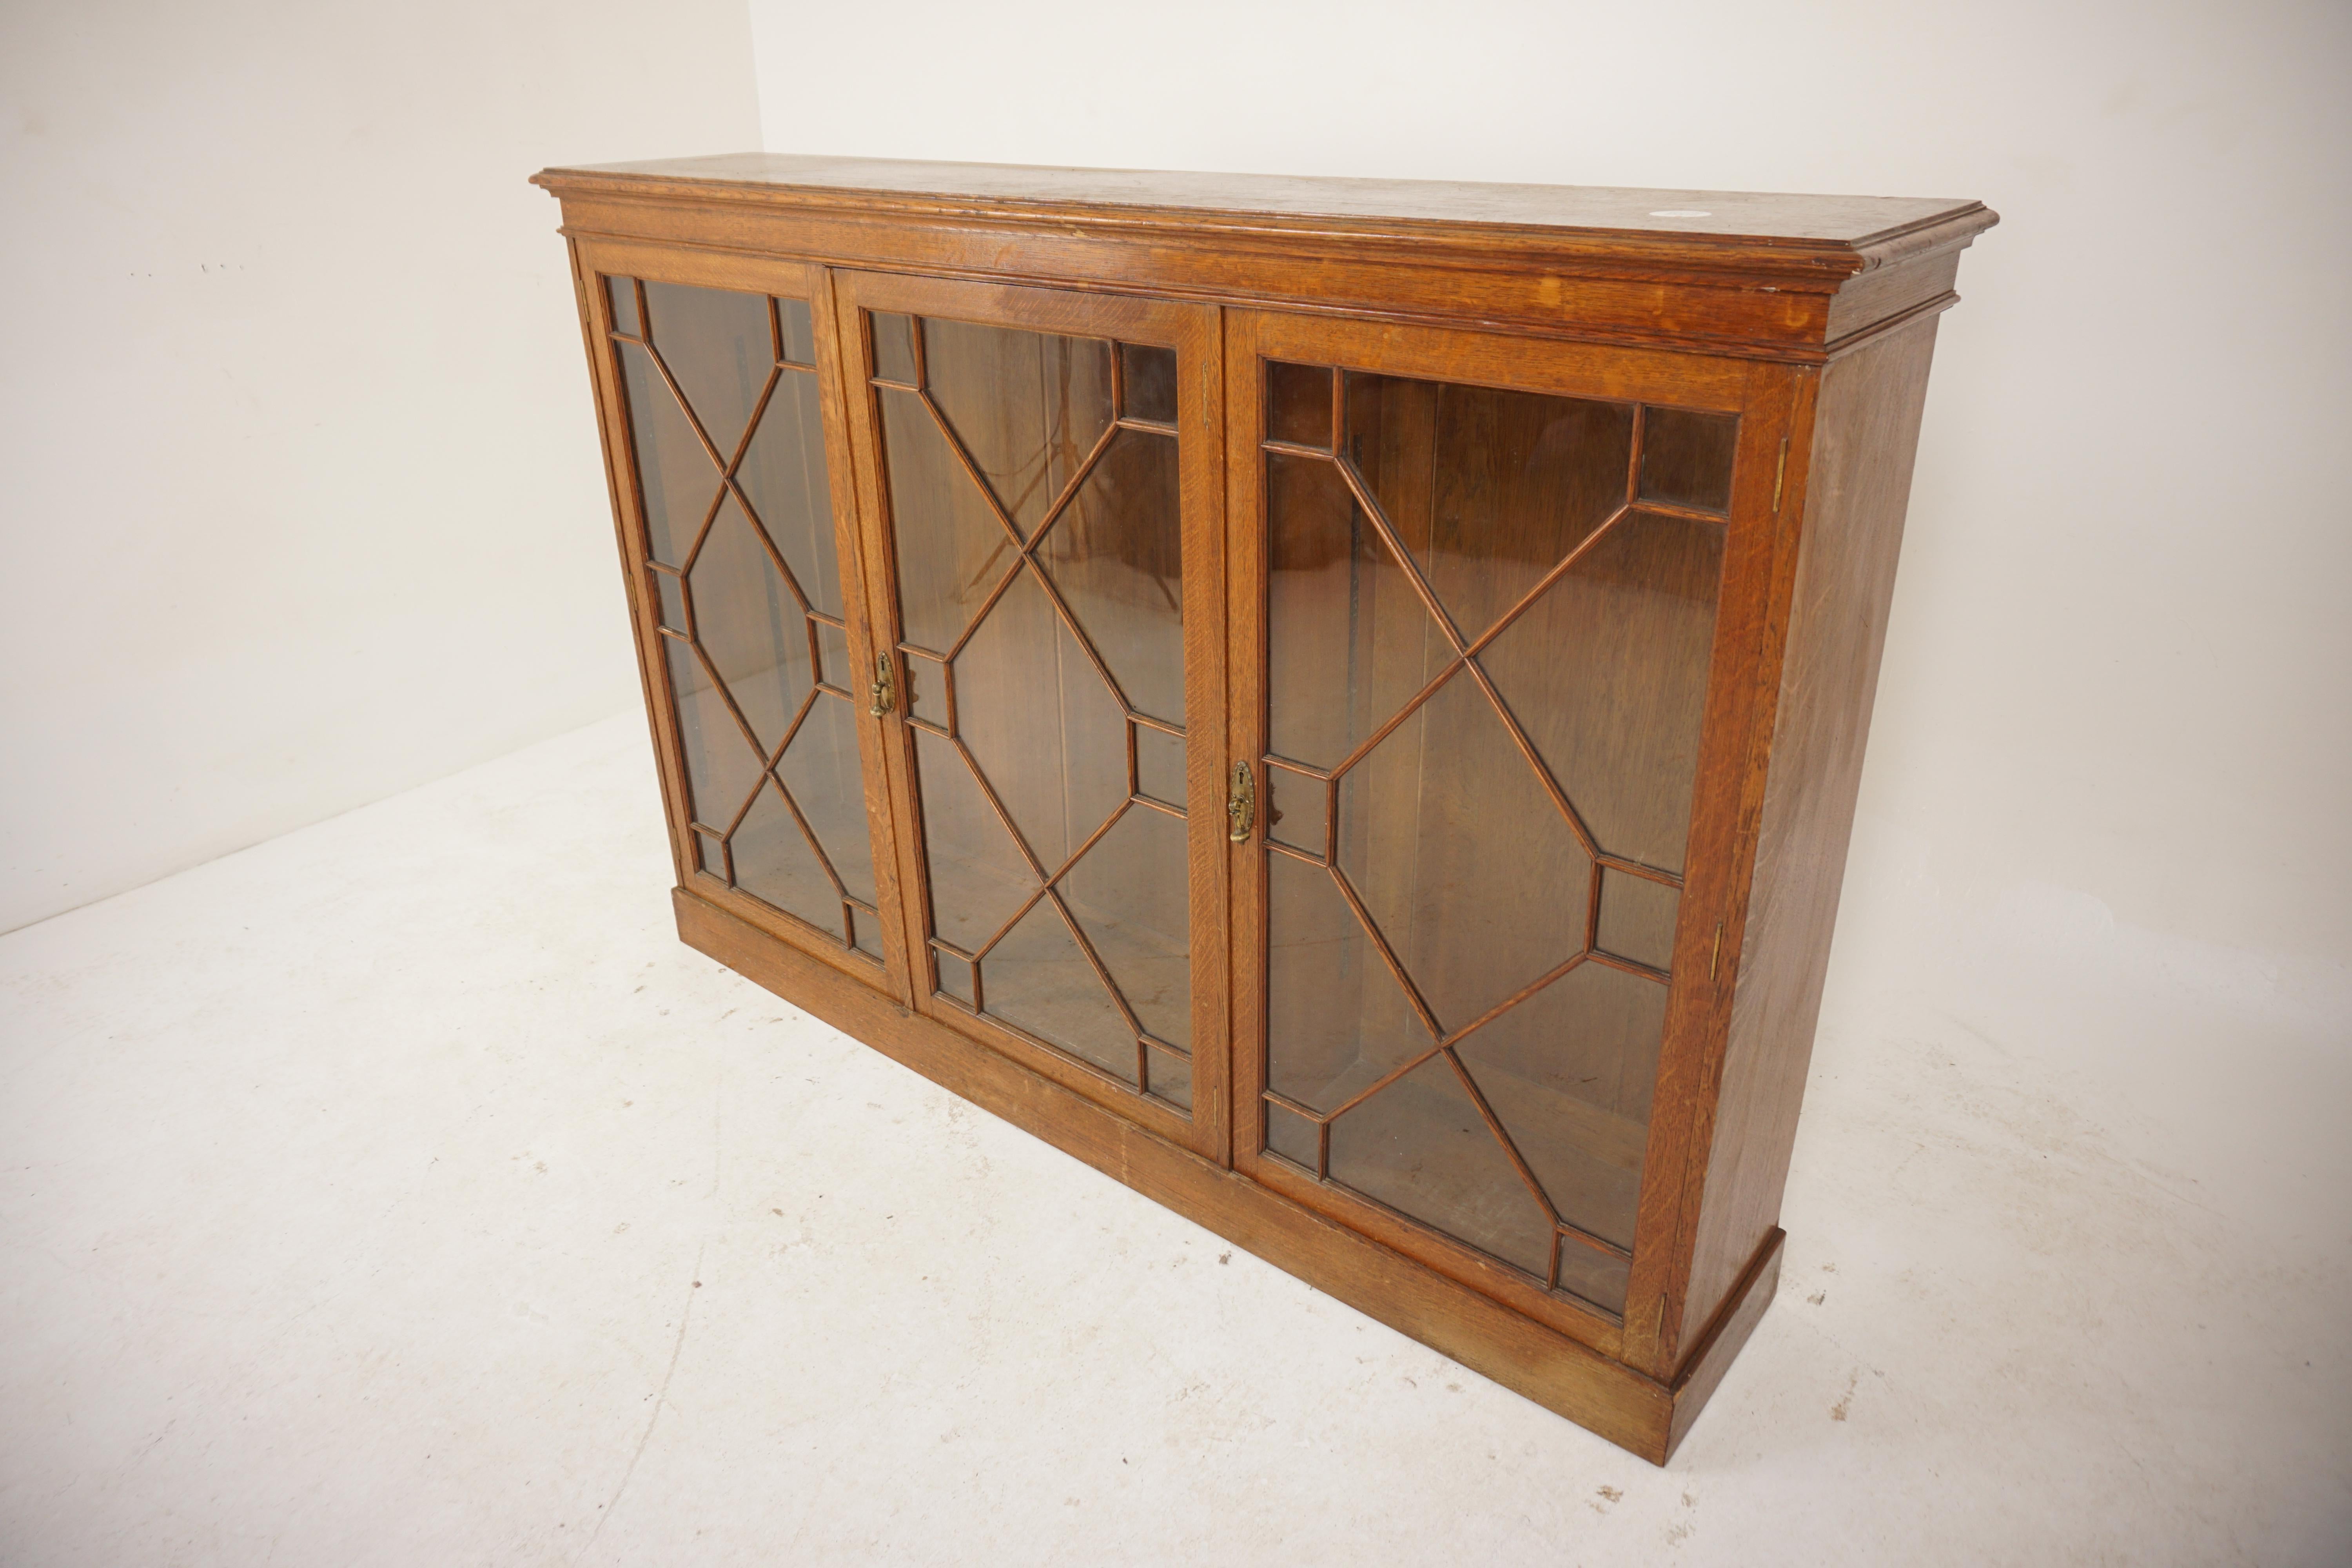 Ant. Arts + crafts 3 door oak bookcase, display cabinet, Scotland 1910, H748

Scotland 1910
Solid Oak
Original Finish
Rectangular moulded top
Three original glass doors with oak moulding on the front
To the right single door opens to reveal